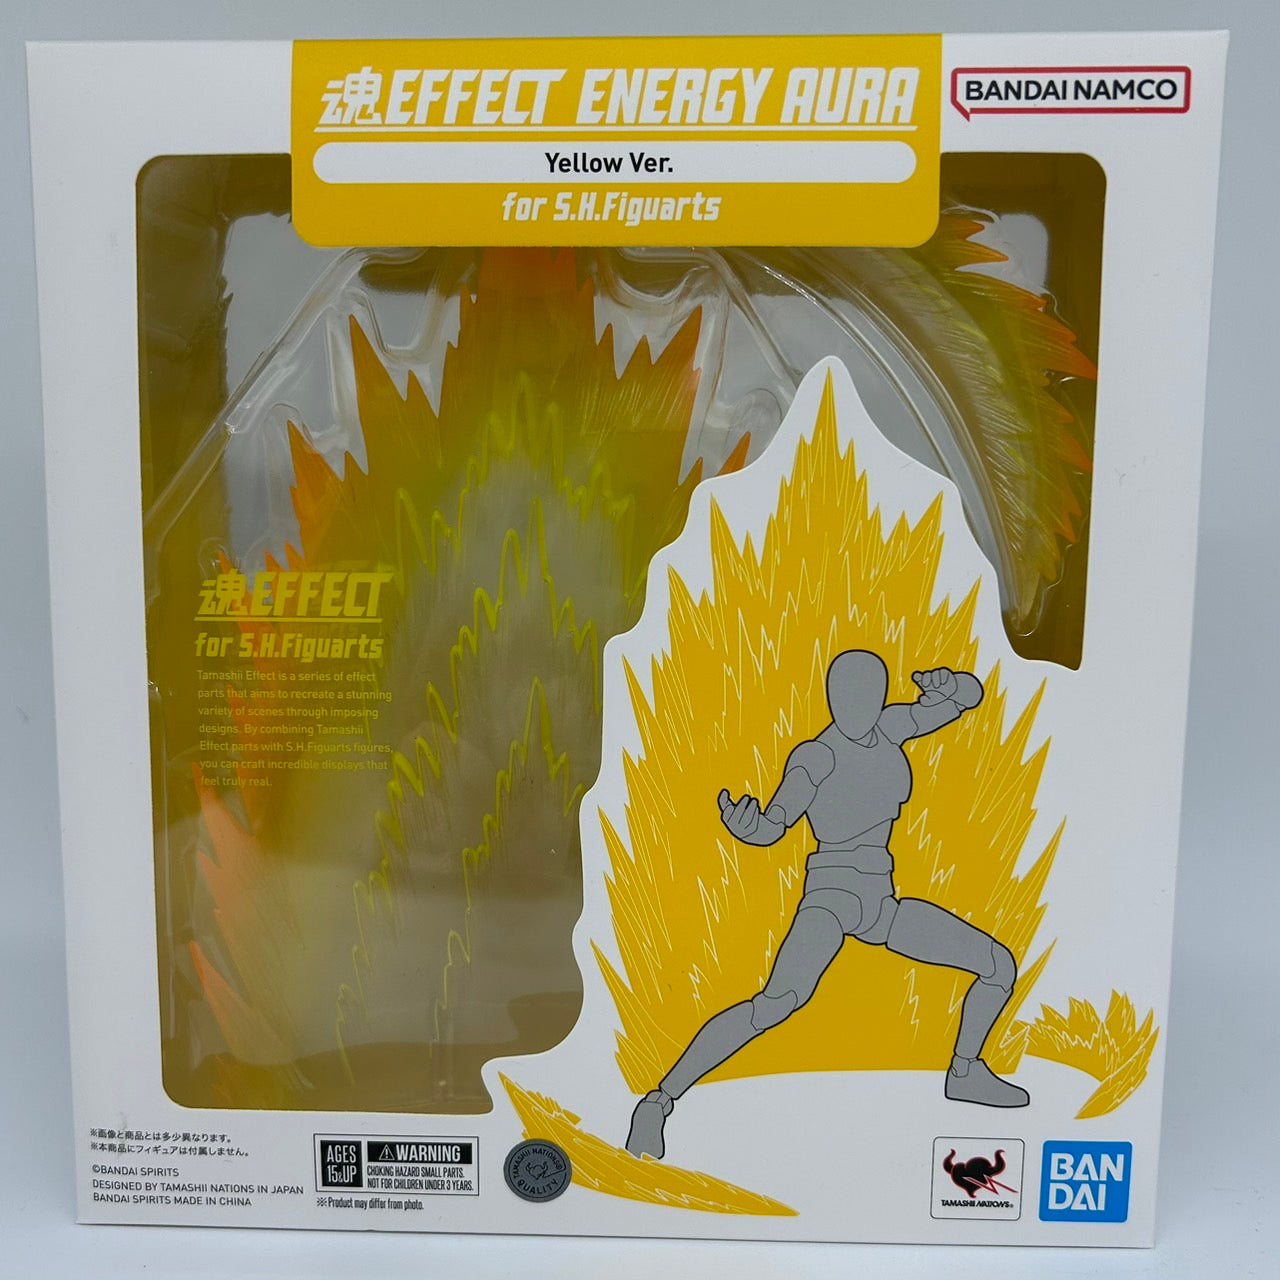 S.H.Figuarts EFFECT ENERGY AURA Yellow Ver. for S.H.Figuarts